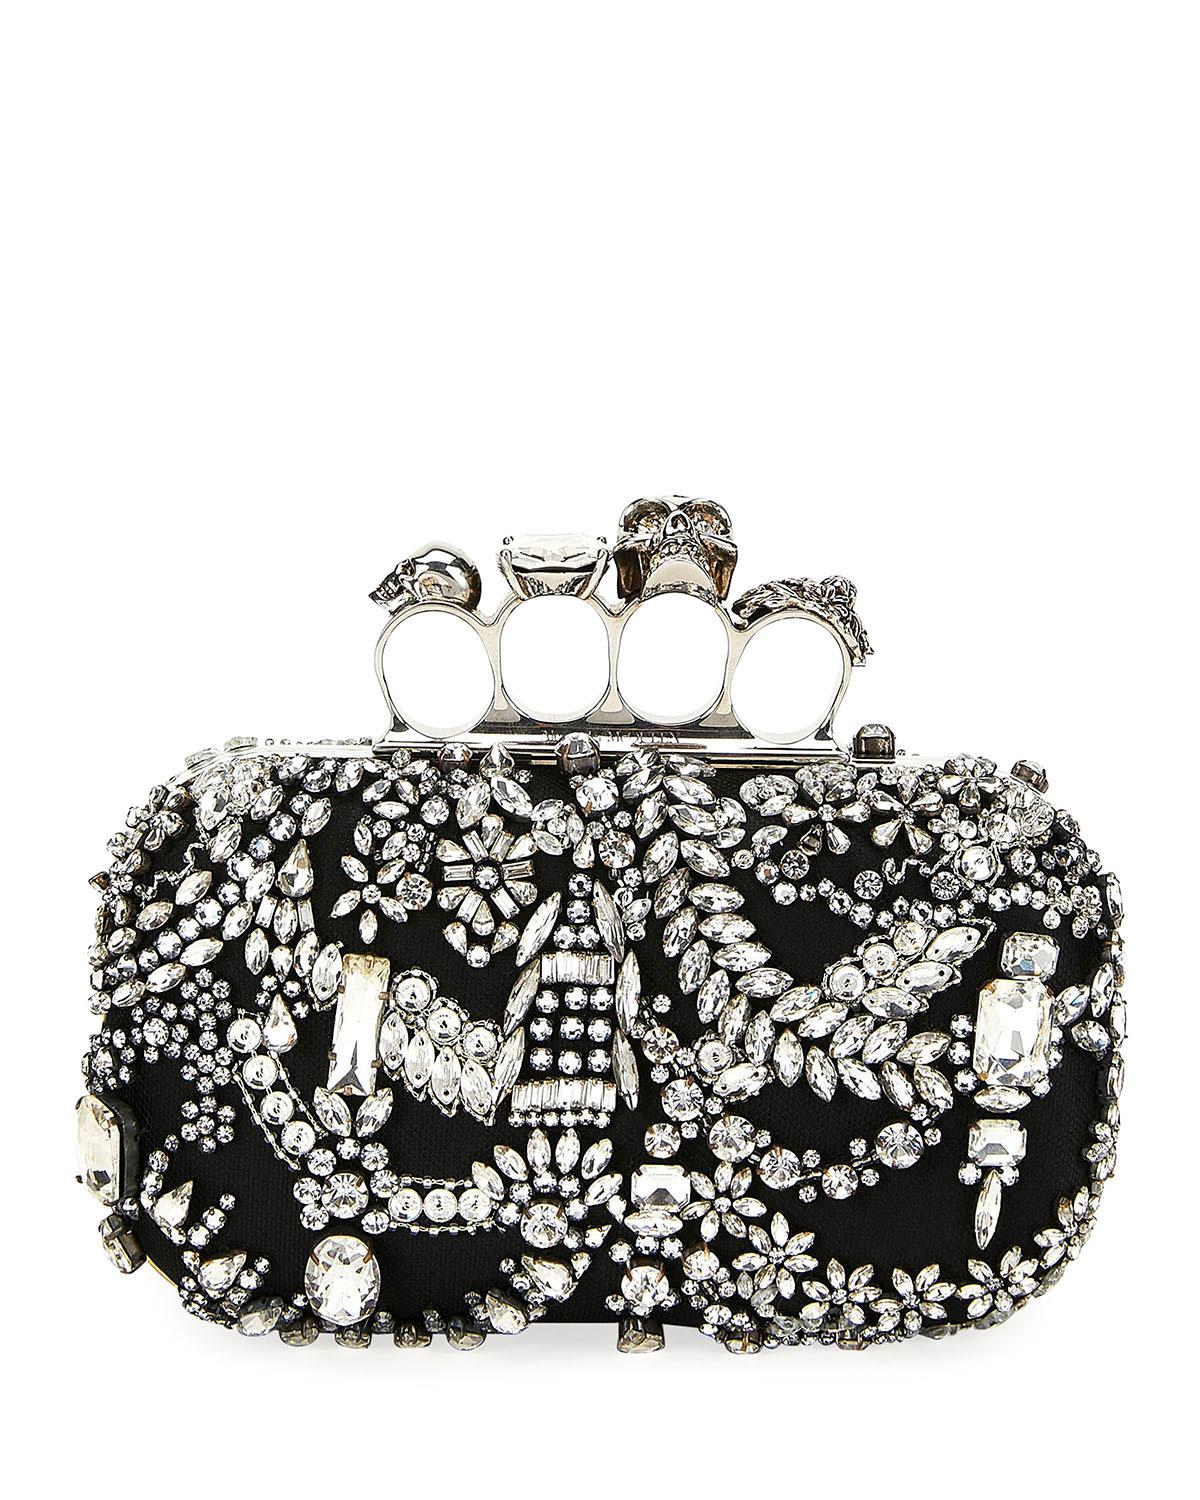 Alexander McQueen Four-ring Jeweled Skull Clutch Bag in Black - Lyst